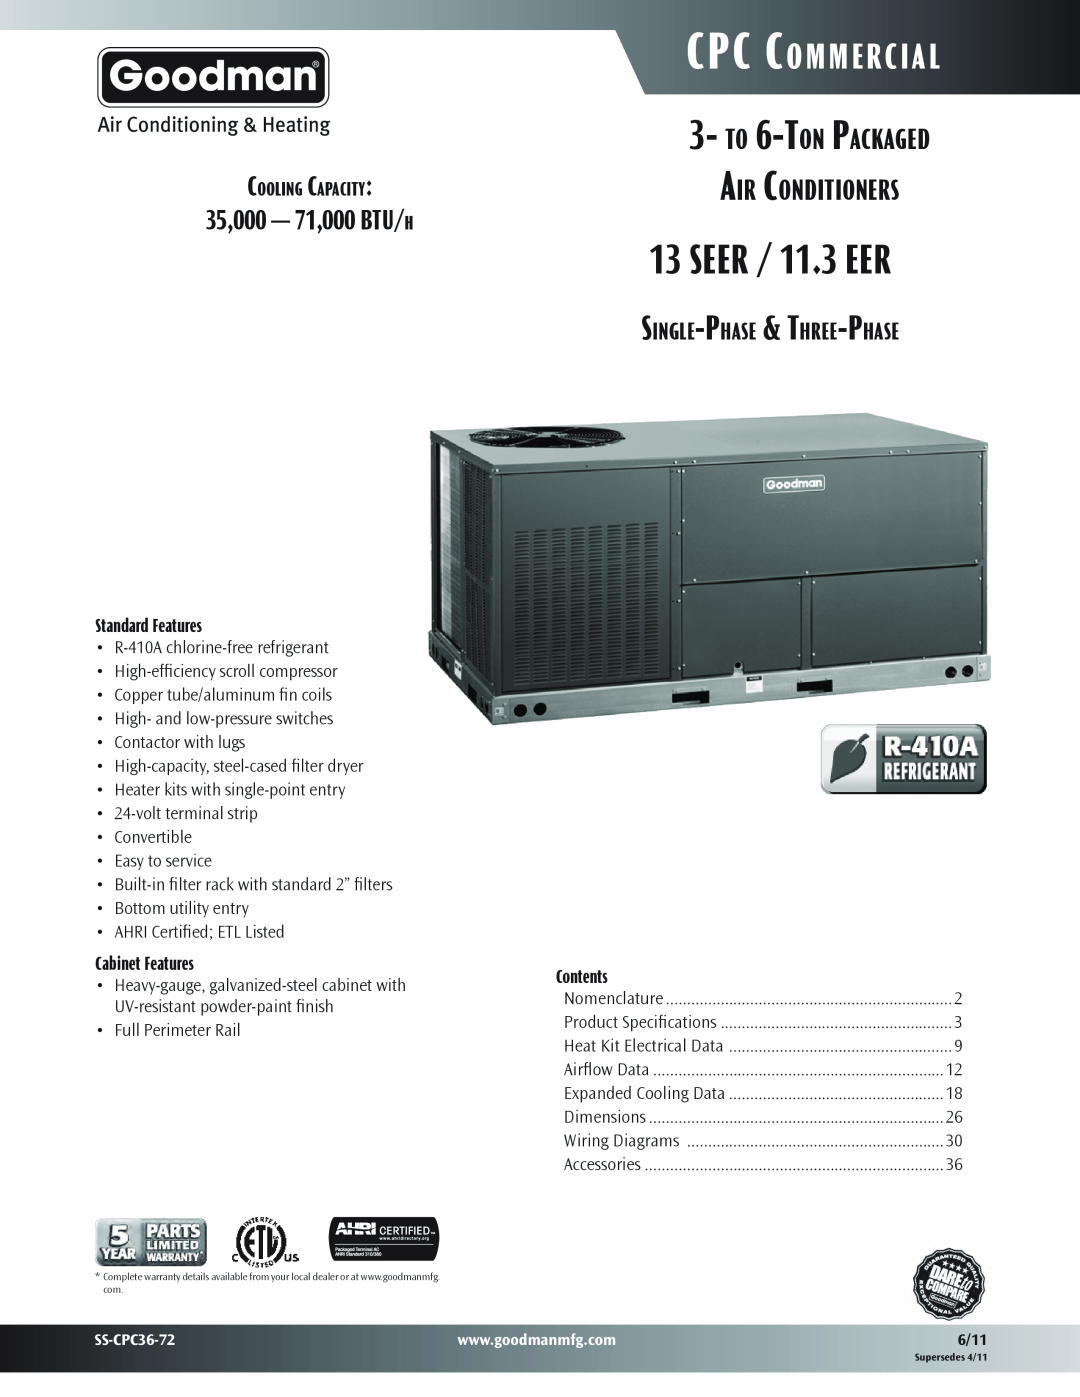 Goodman Mfg SS-CPC36-72 dimensions 35,000 - 71,000 BTU/h, SEER / 11.3 EER, CPC Commercial, Single-Phase & Three-Phase 